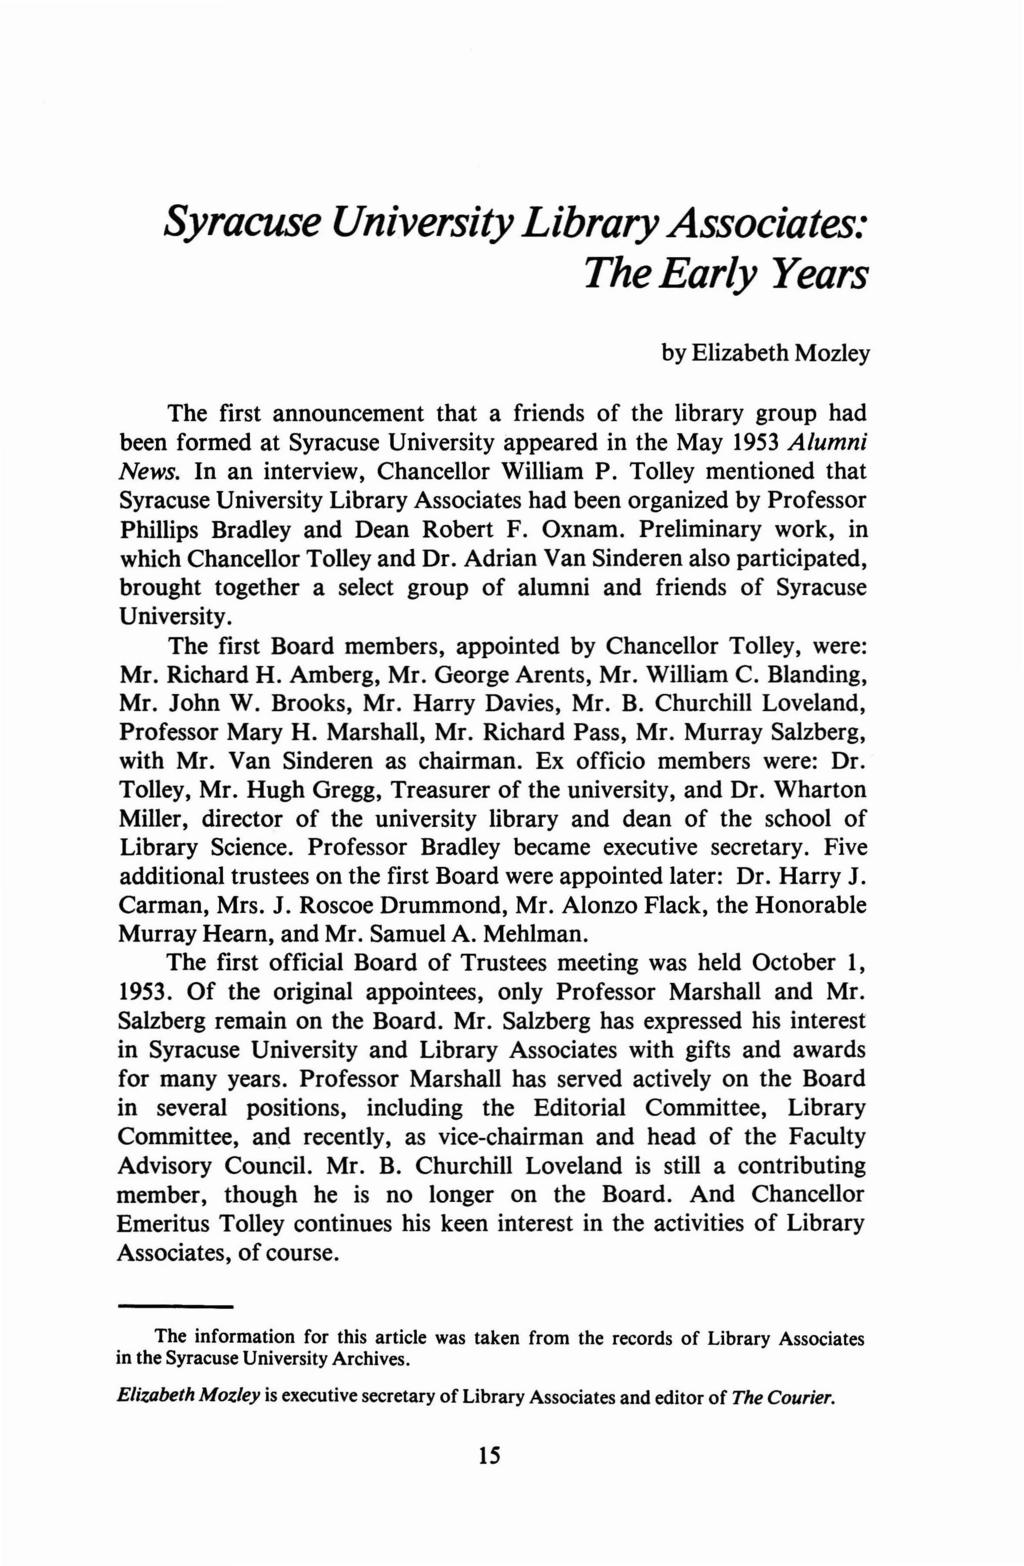 Syracuse University Library Associates: The Early Years by Elizabeth Mozley The first announcement that a friends of the library group had been formed at Syracuse University appeared in the May 1953